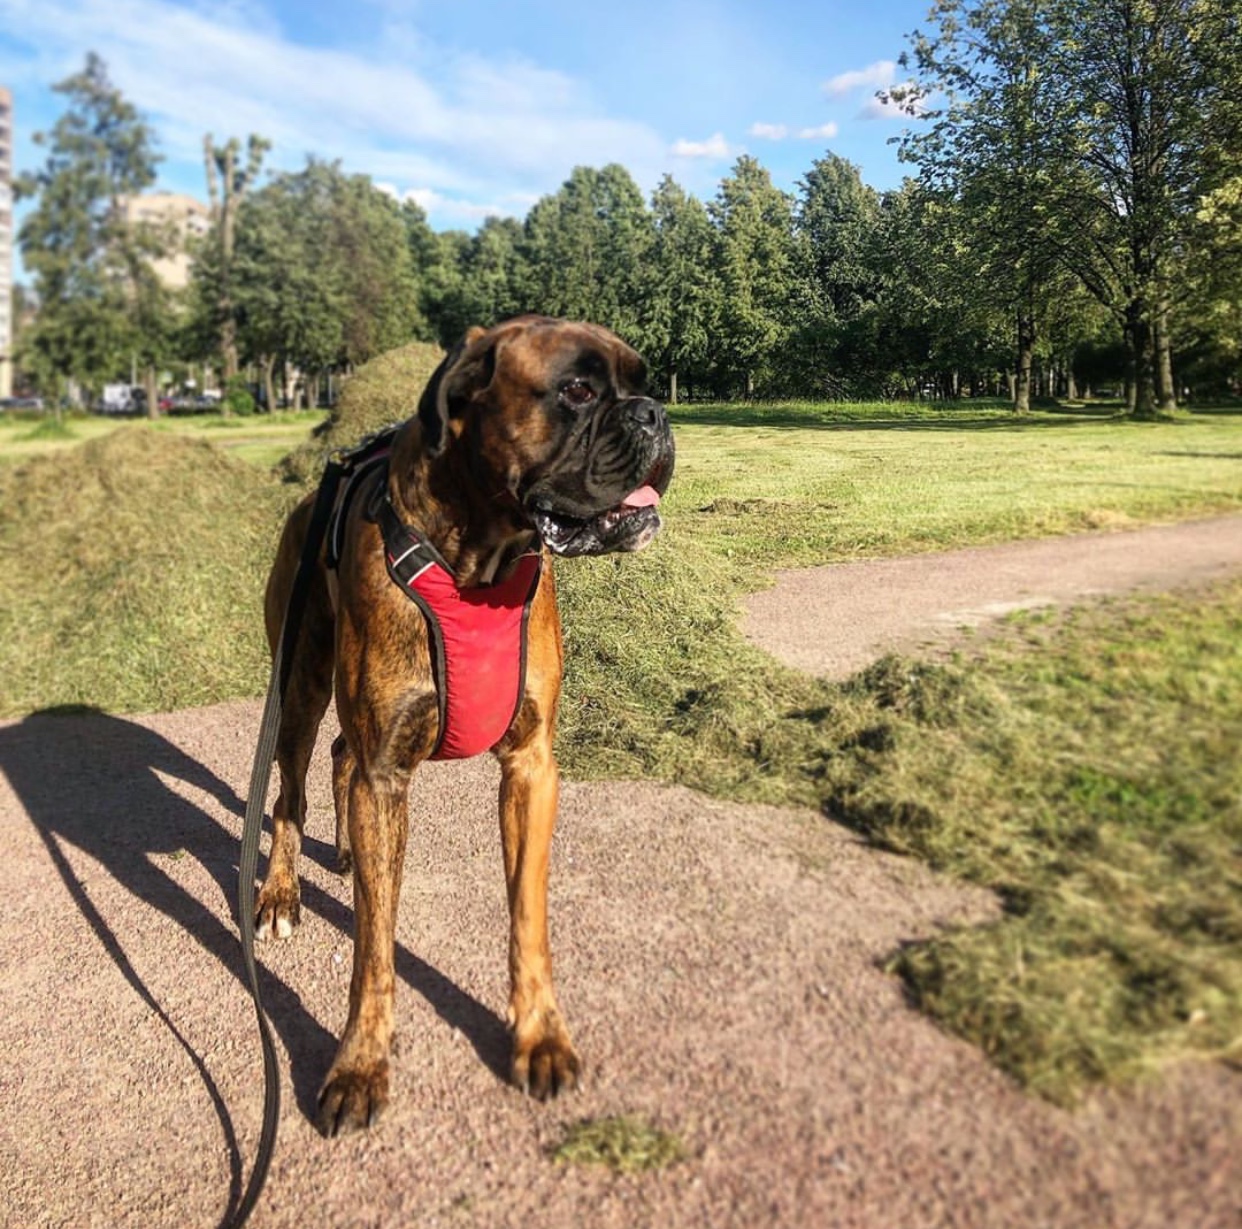 A boxer dog standing on the ground at the park